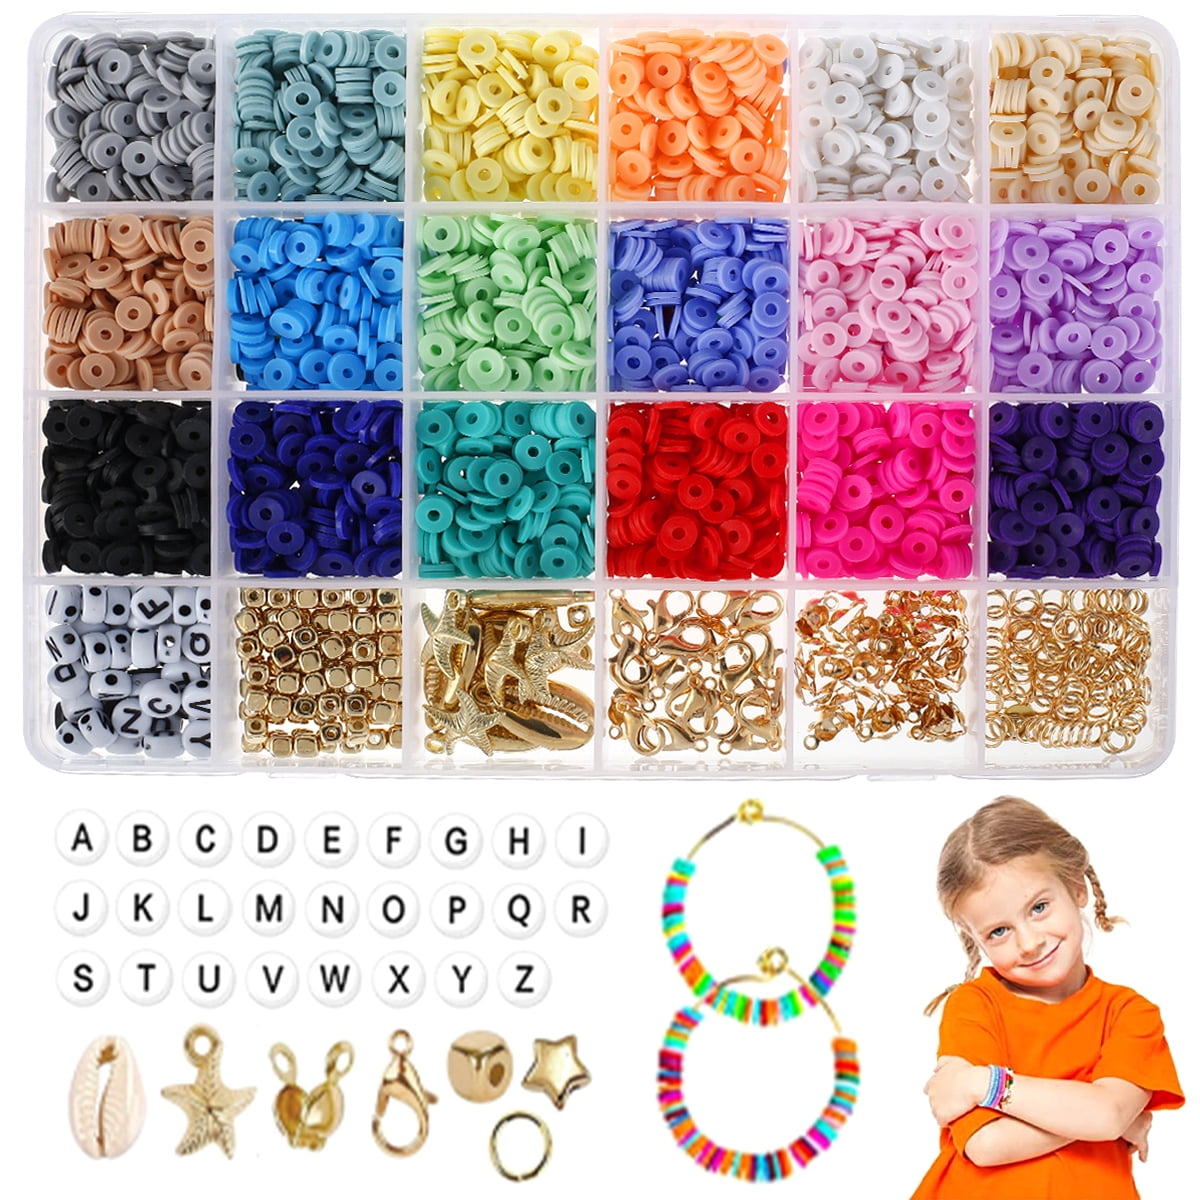 Craft Beads Kit 10800pcs 3mm Glass Seed Beads And 1200pcs Letter Beads For  Friendship Bracelets Jewelry Making Necklaces And Key Chains With 2 Rolls O